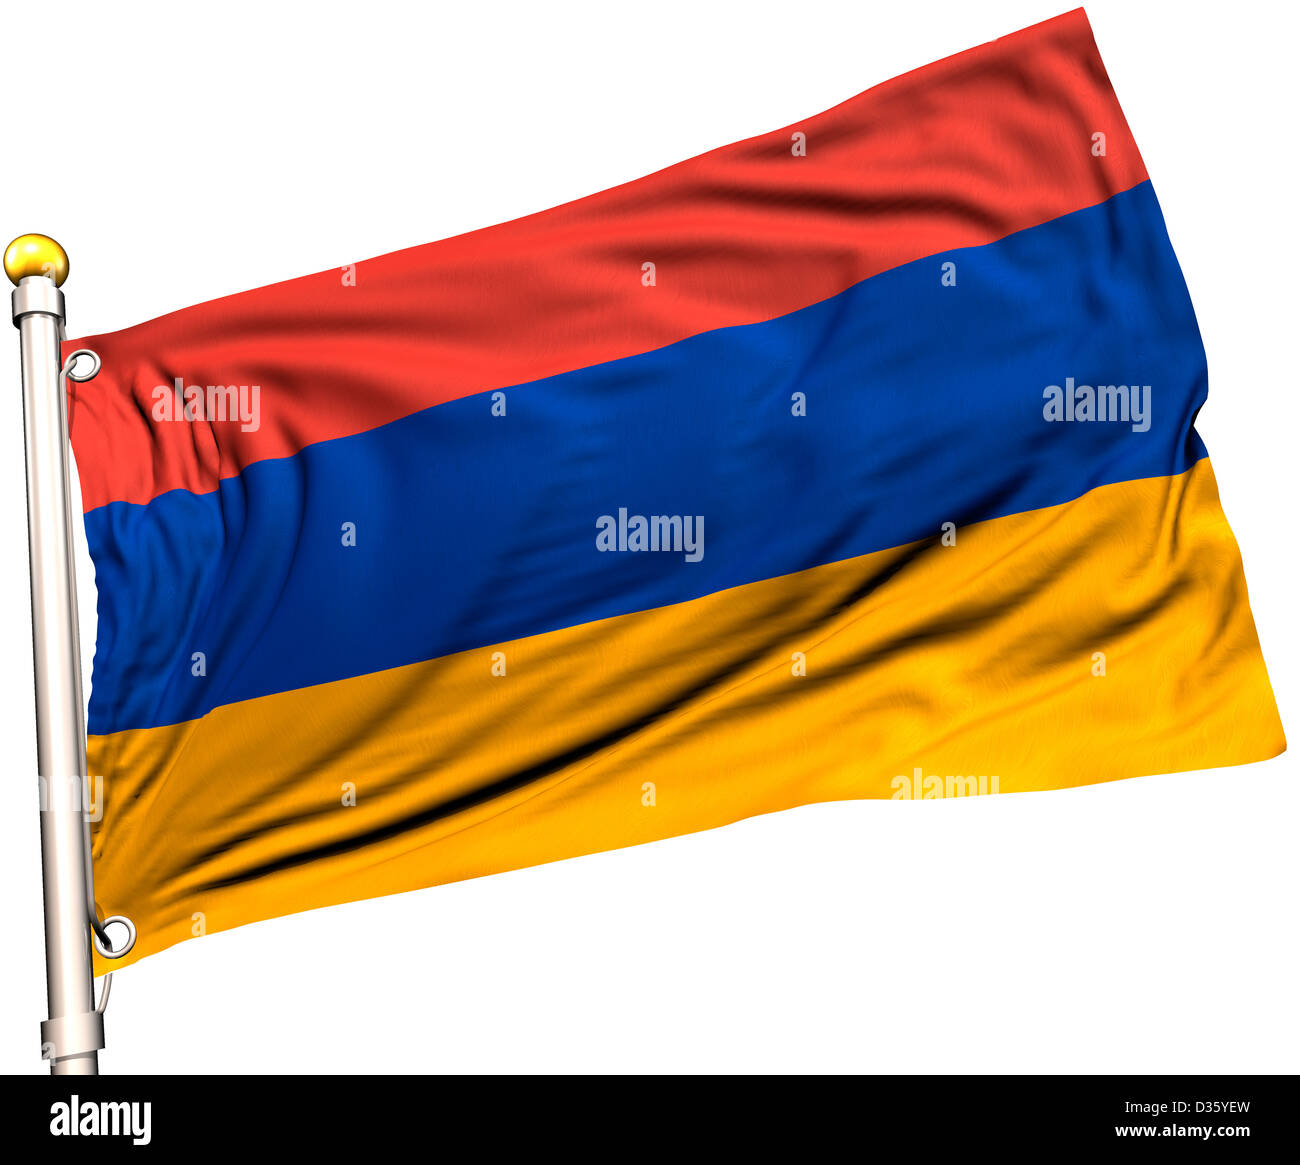 Armenia flag on a flag pole. Clipping path included. Silk texture visible on the flag at 100%. Stock Photo